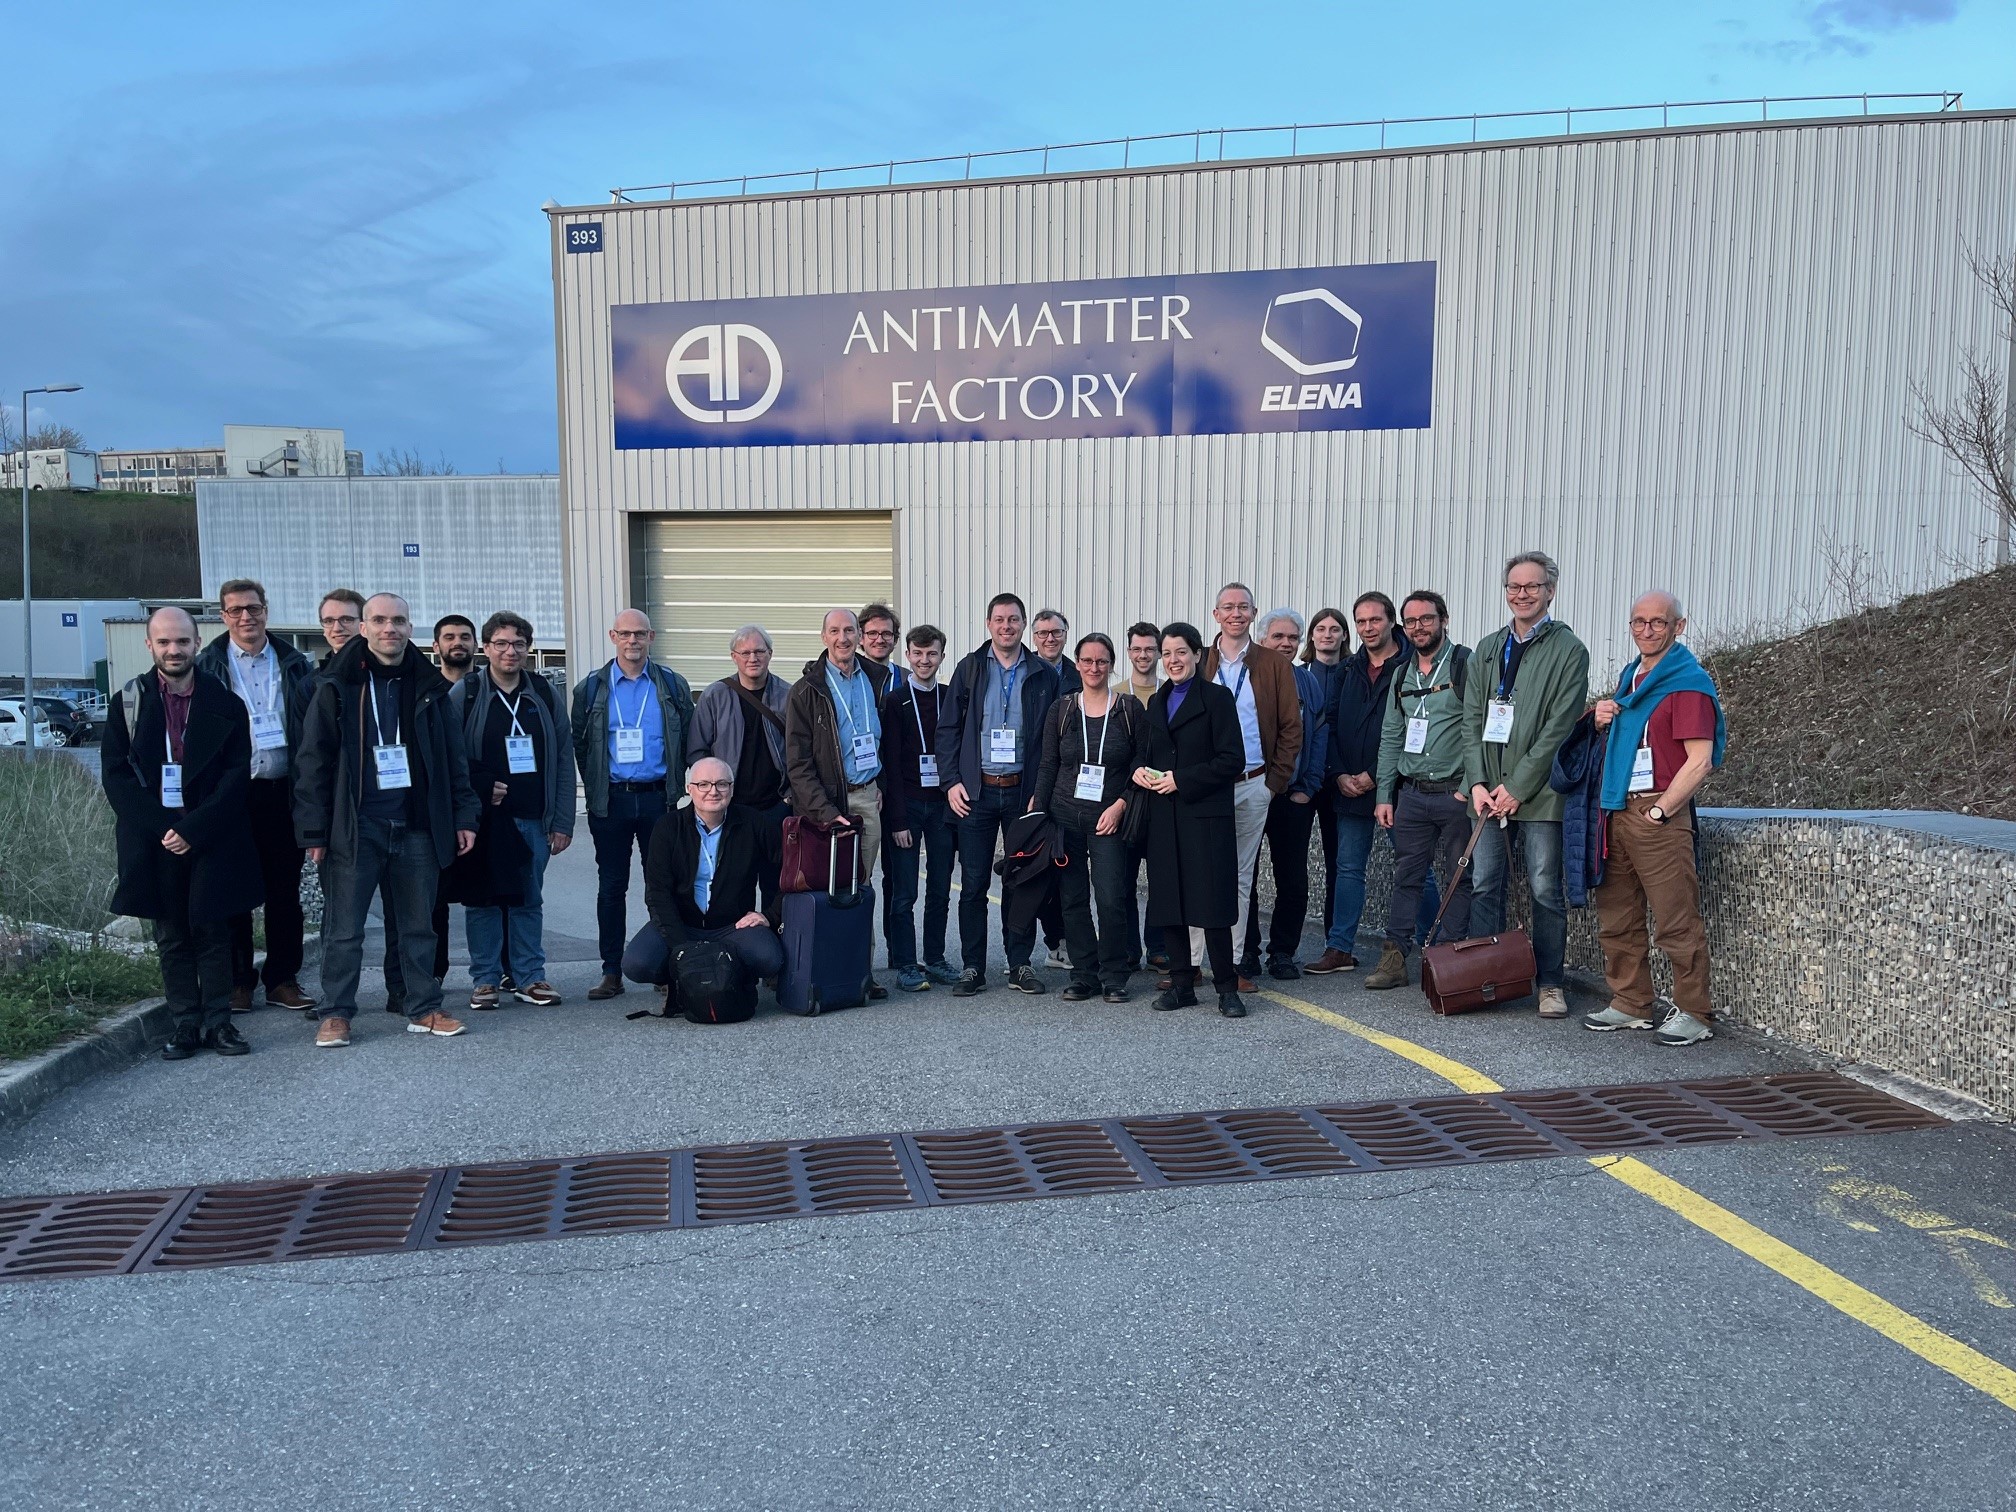 Visit to the Antimmatter Factory at CERN